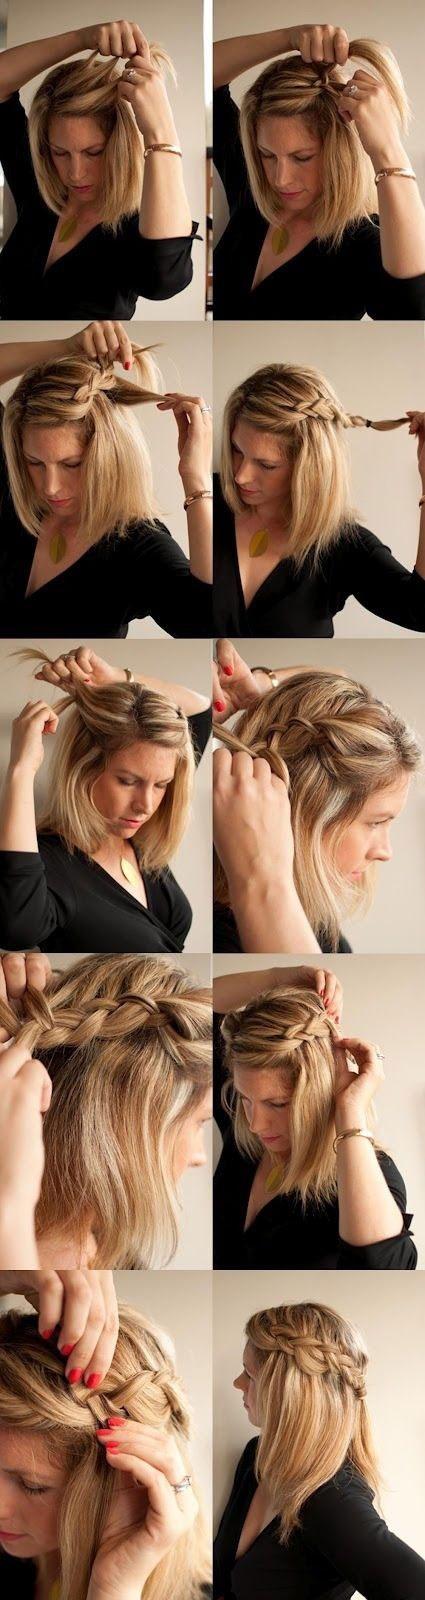 Easy hairstyles for mid length hair easy-hairstyles-for-mid-length-hair-33_18